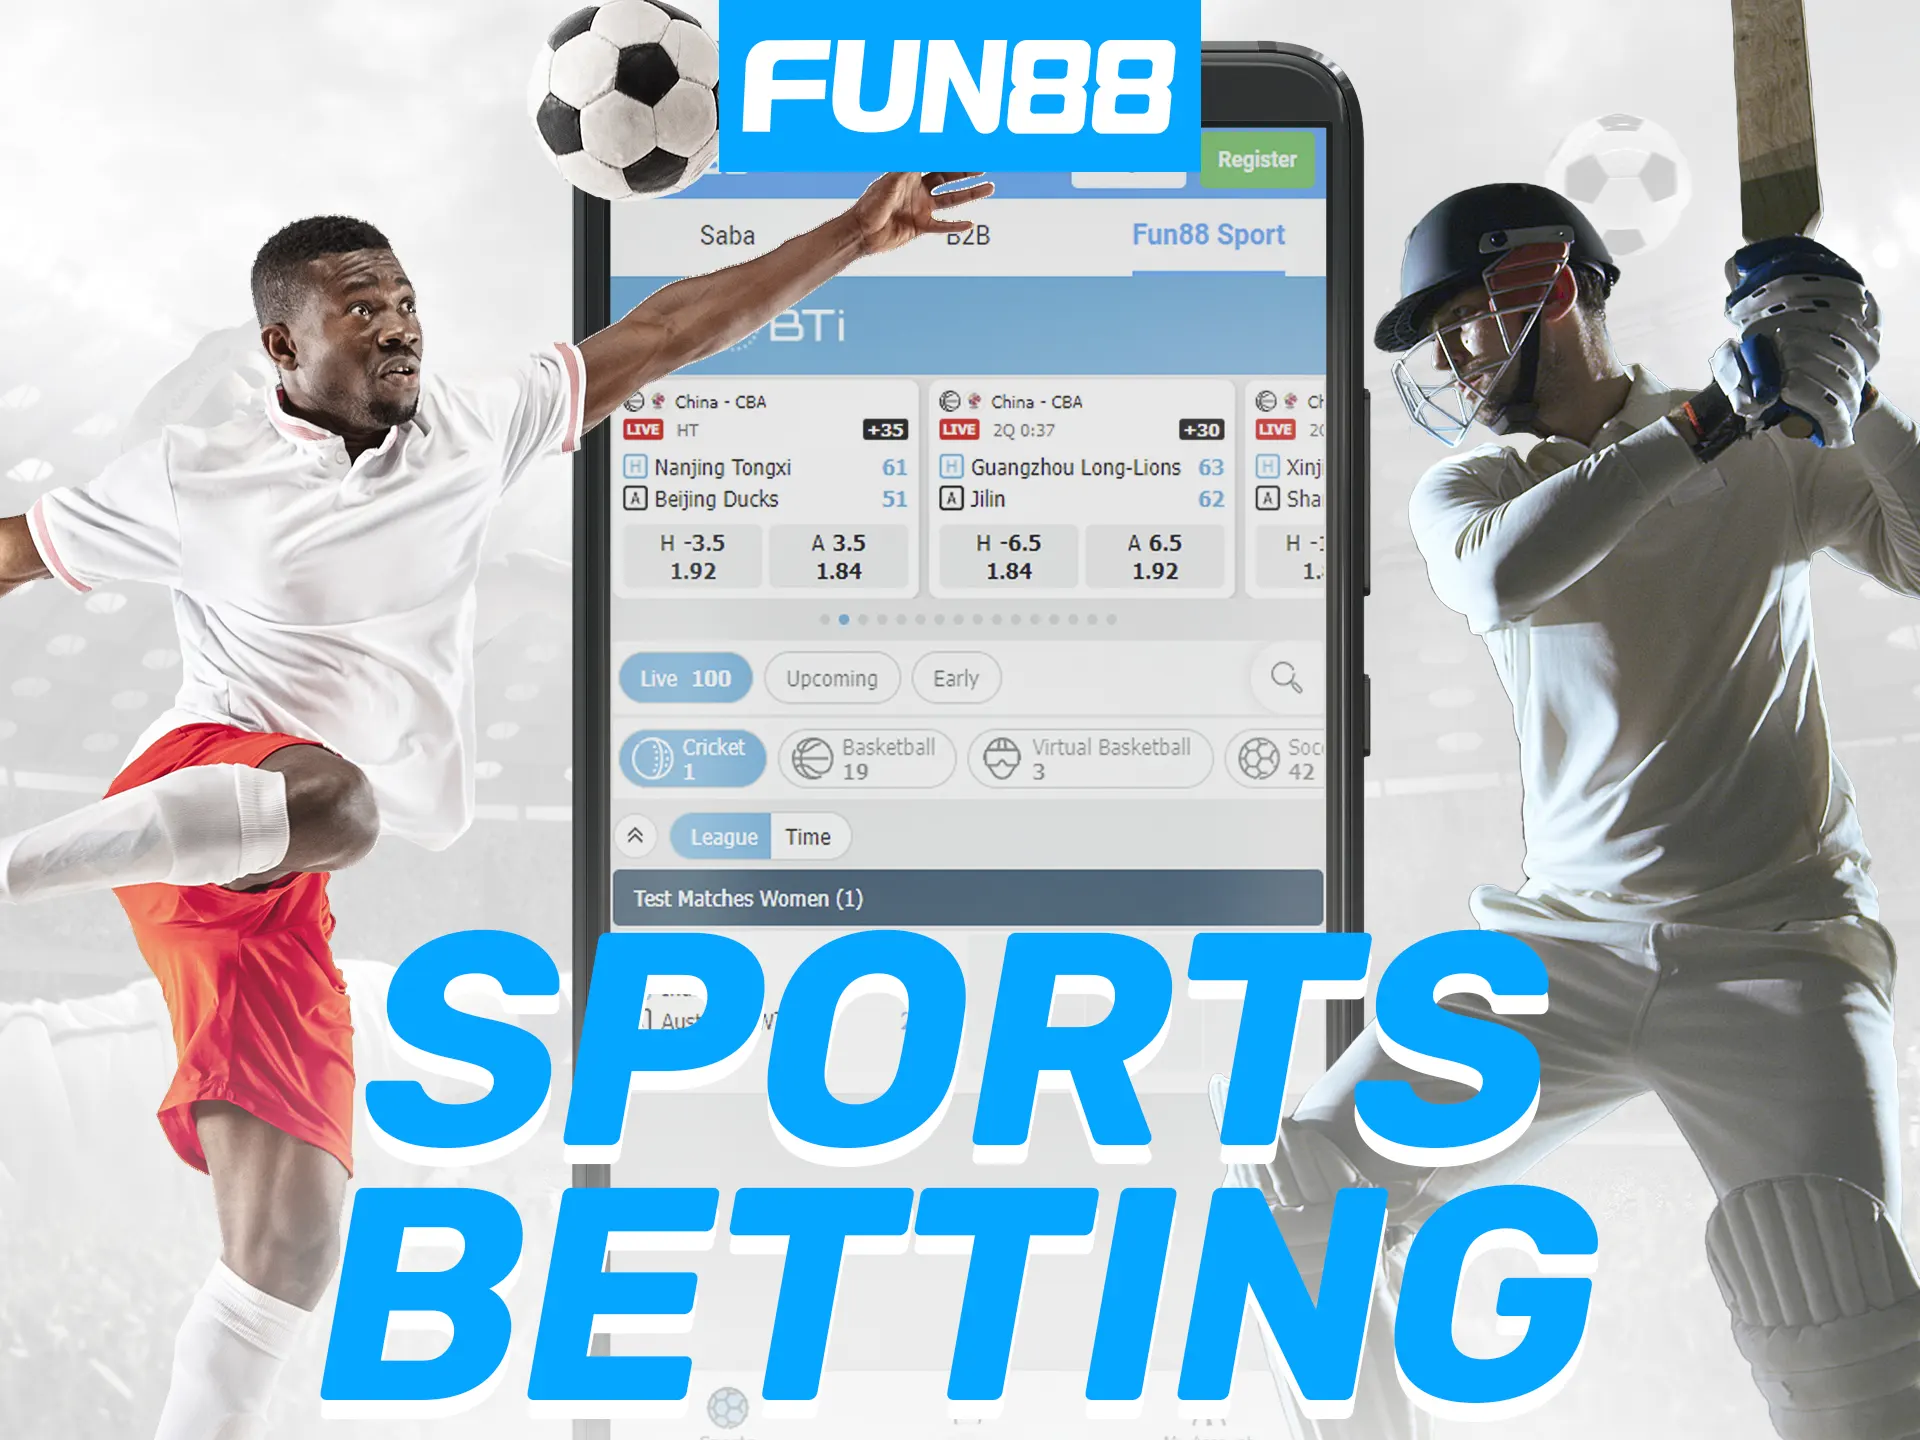 Fun88 app offers diverse sports betting, including cricket, tennis, and live events.